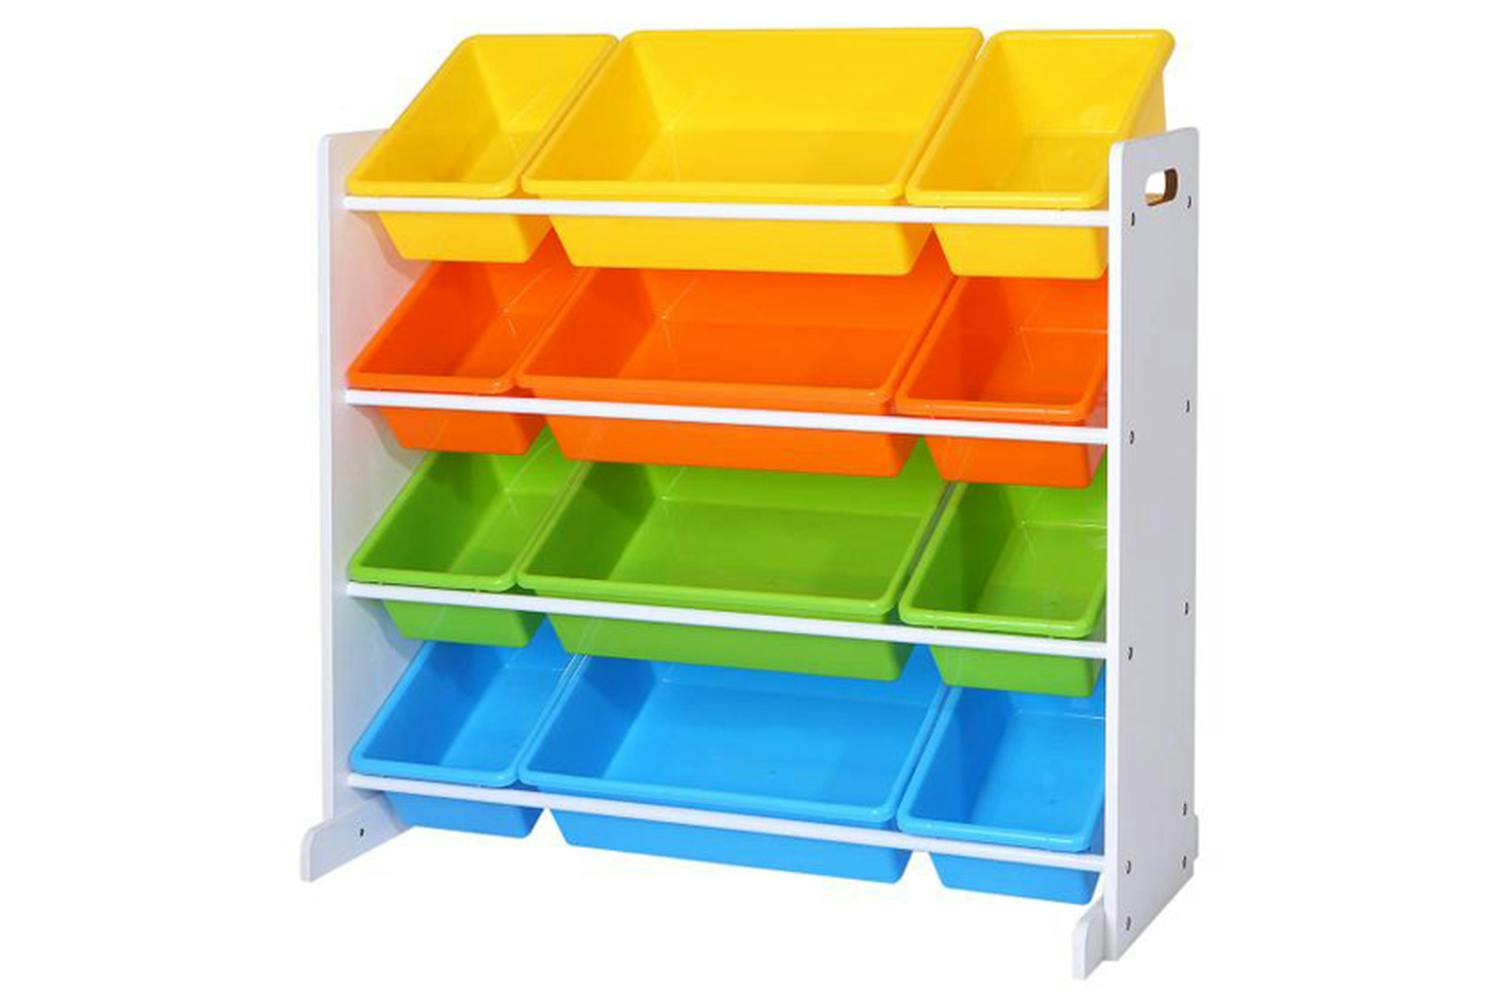 Songmics GKR04W Children's Room Shelf with Colorful Boxes